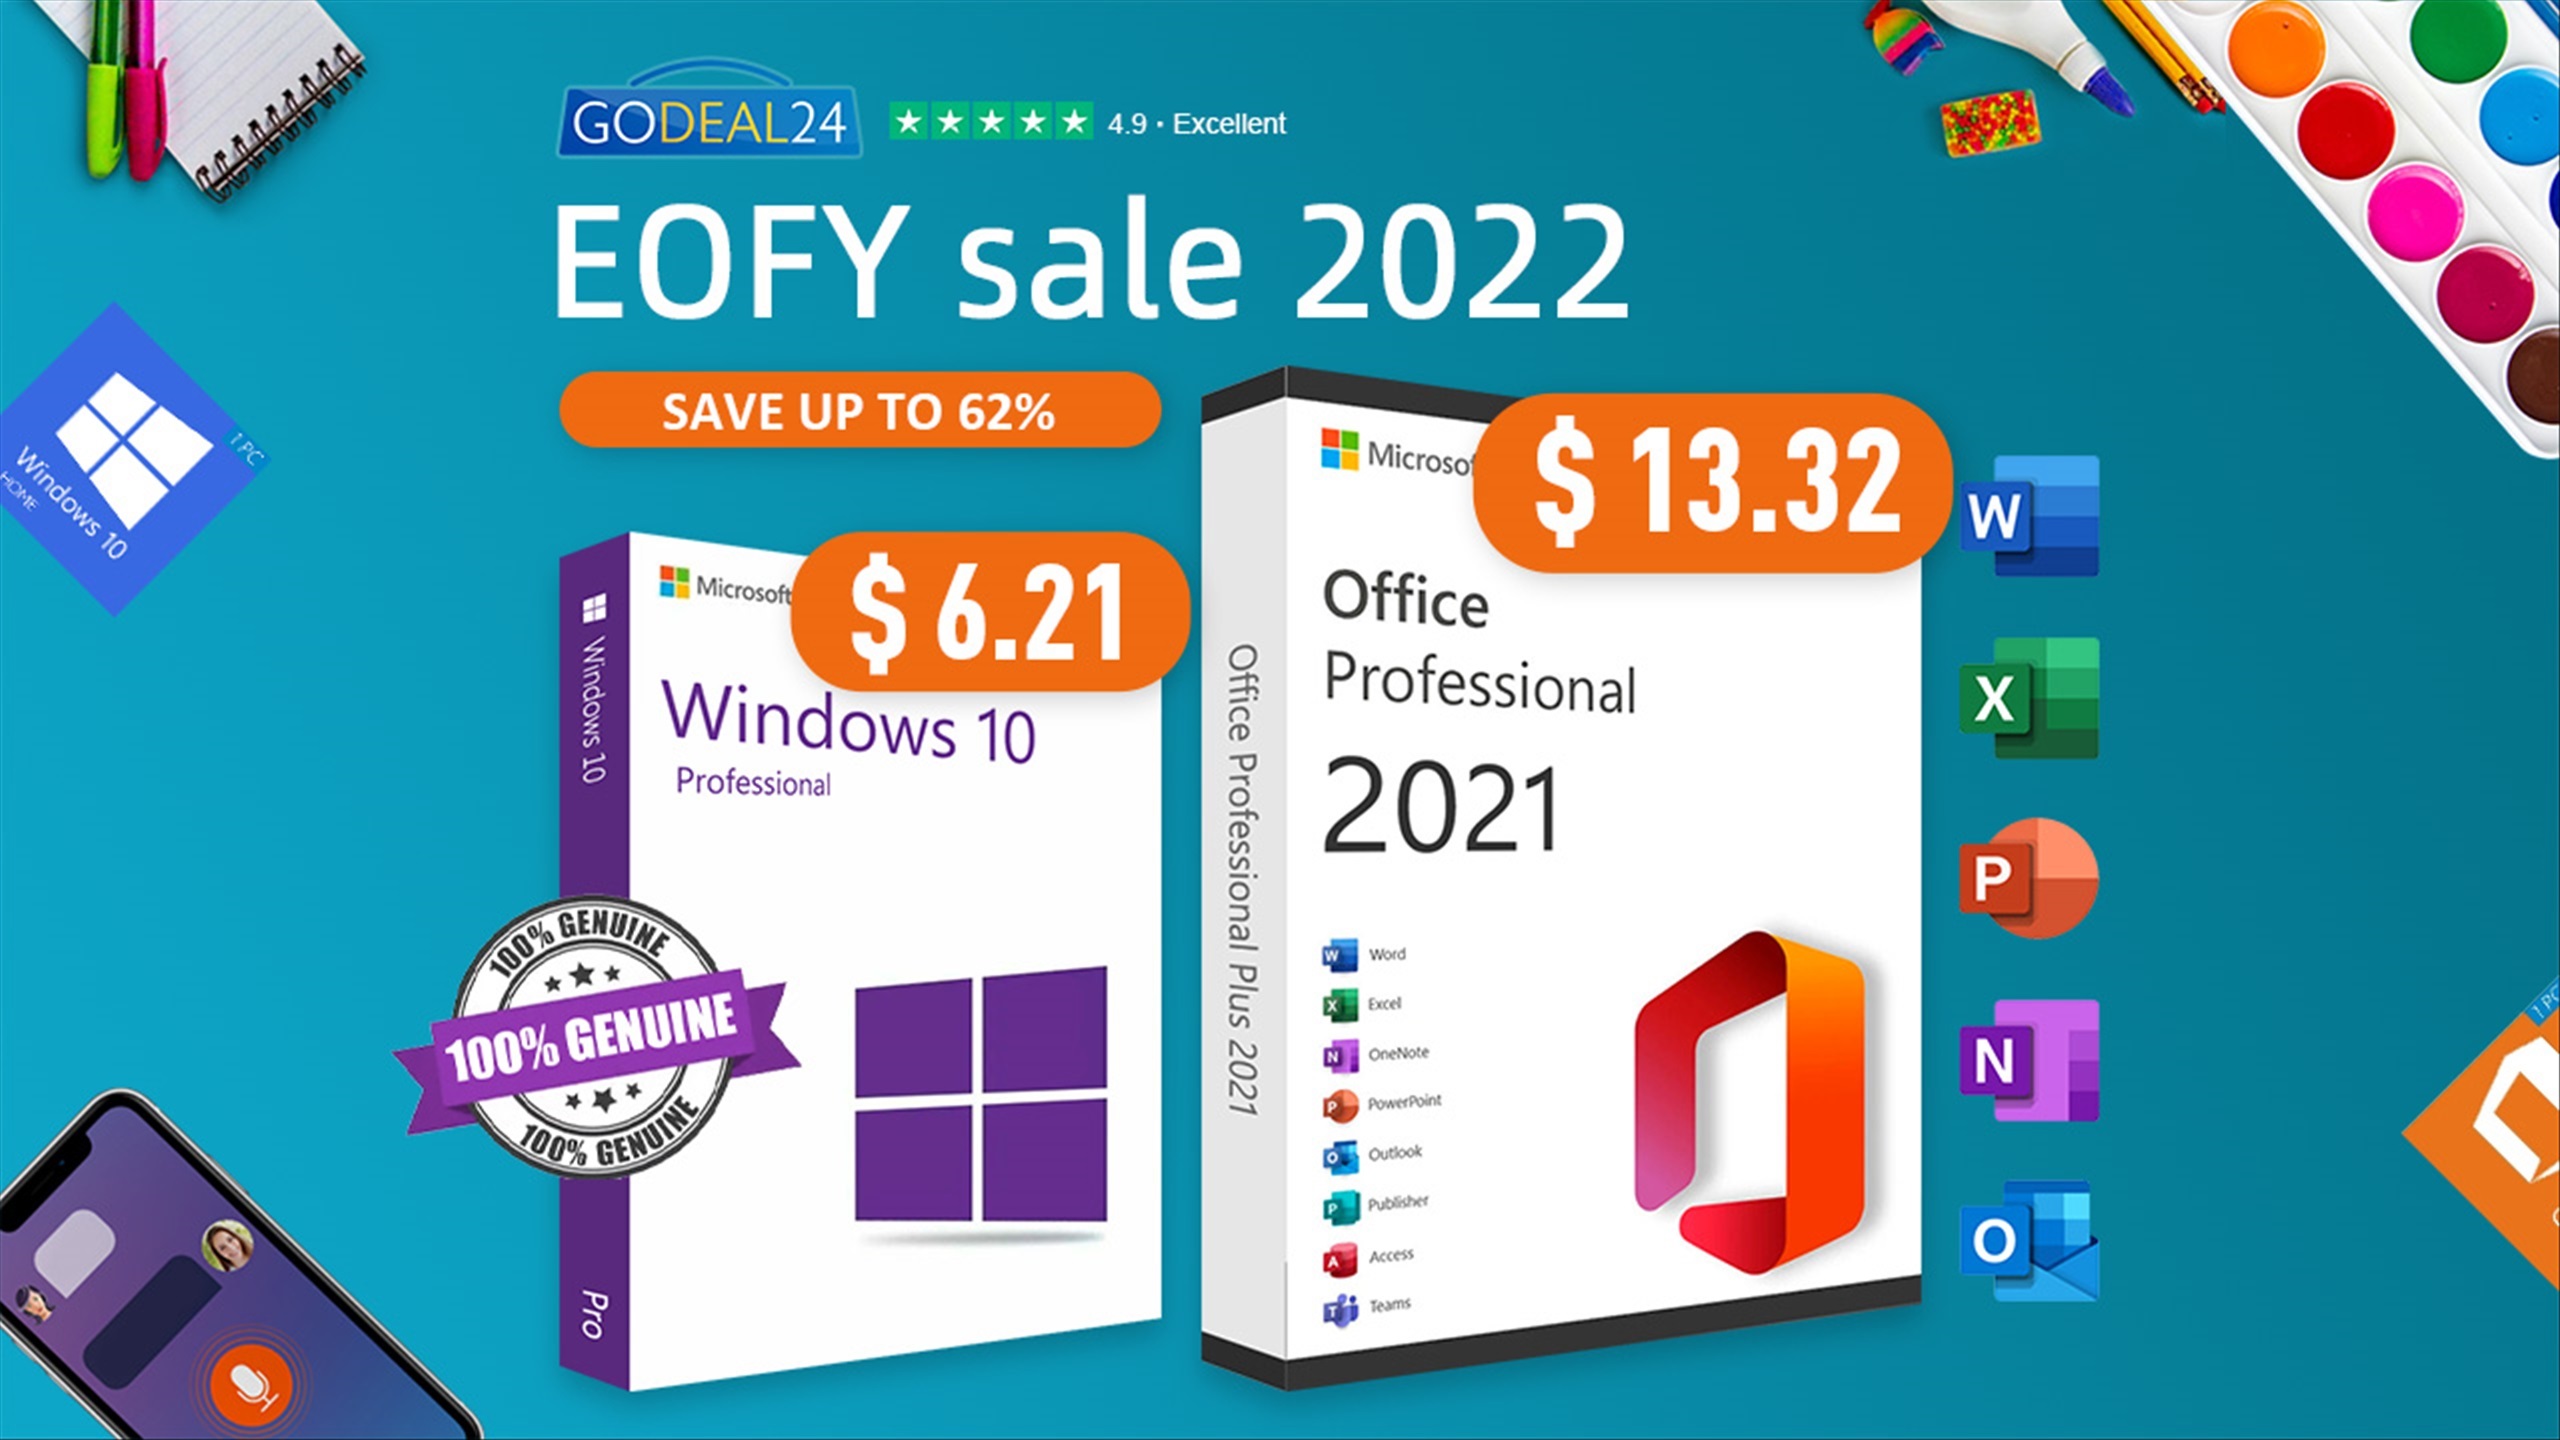 Buy Windows 10 Pro for $6.21 and Office 2021 for $13.32 at Godeal24 EOFY Sale 2022!